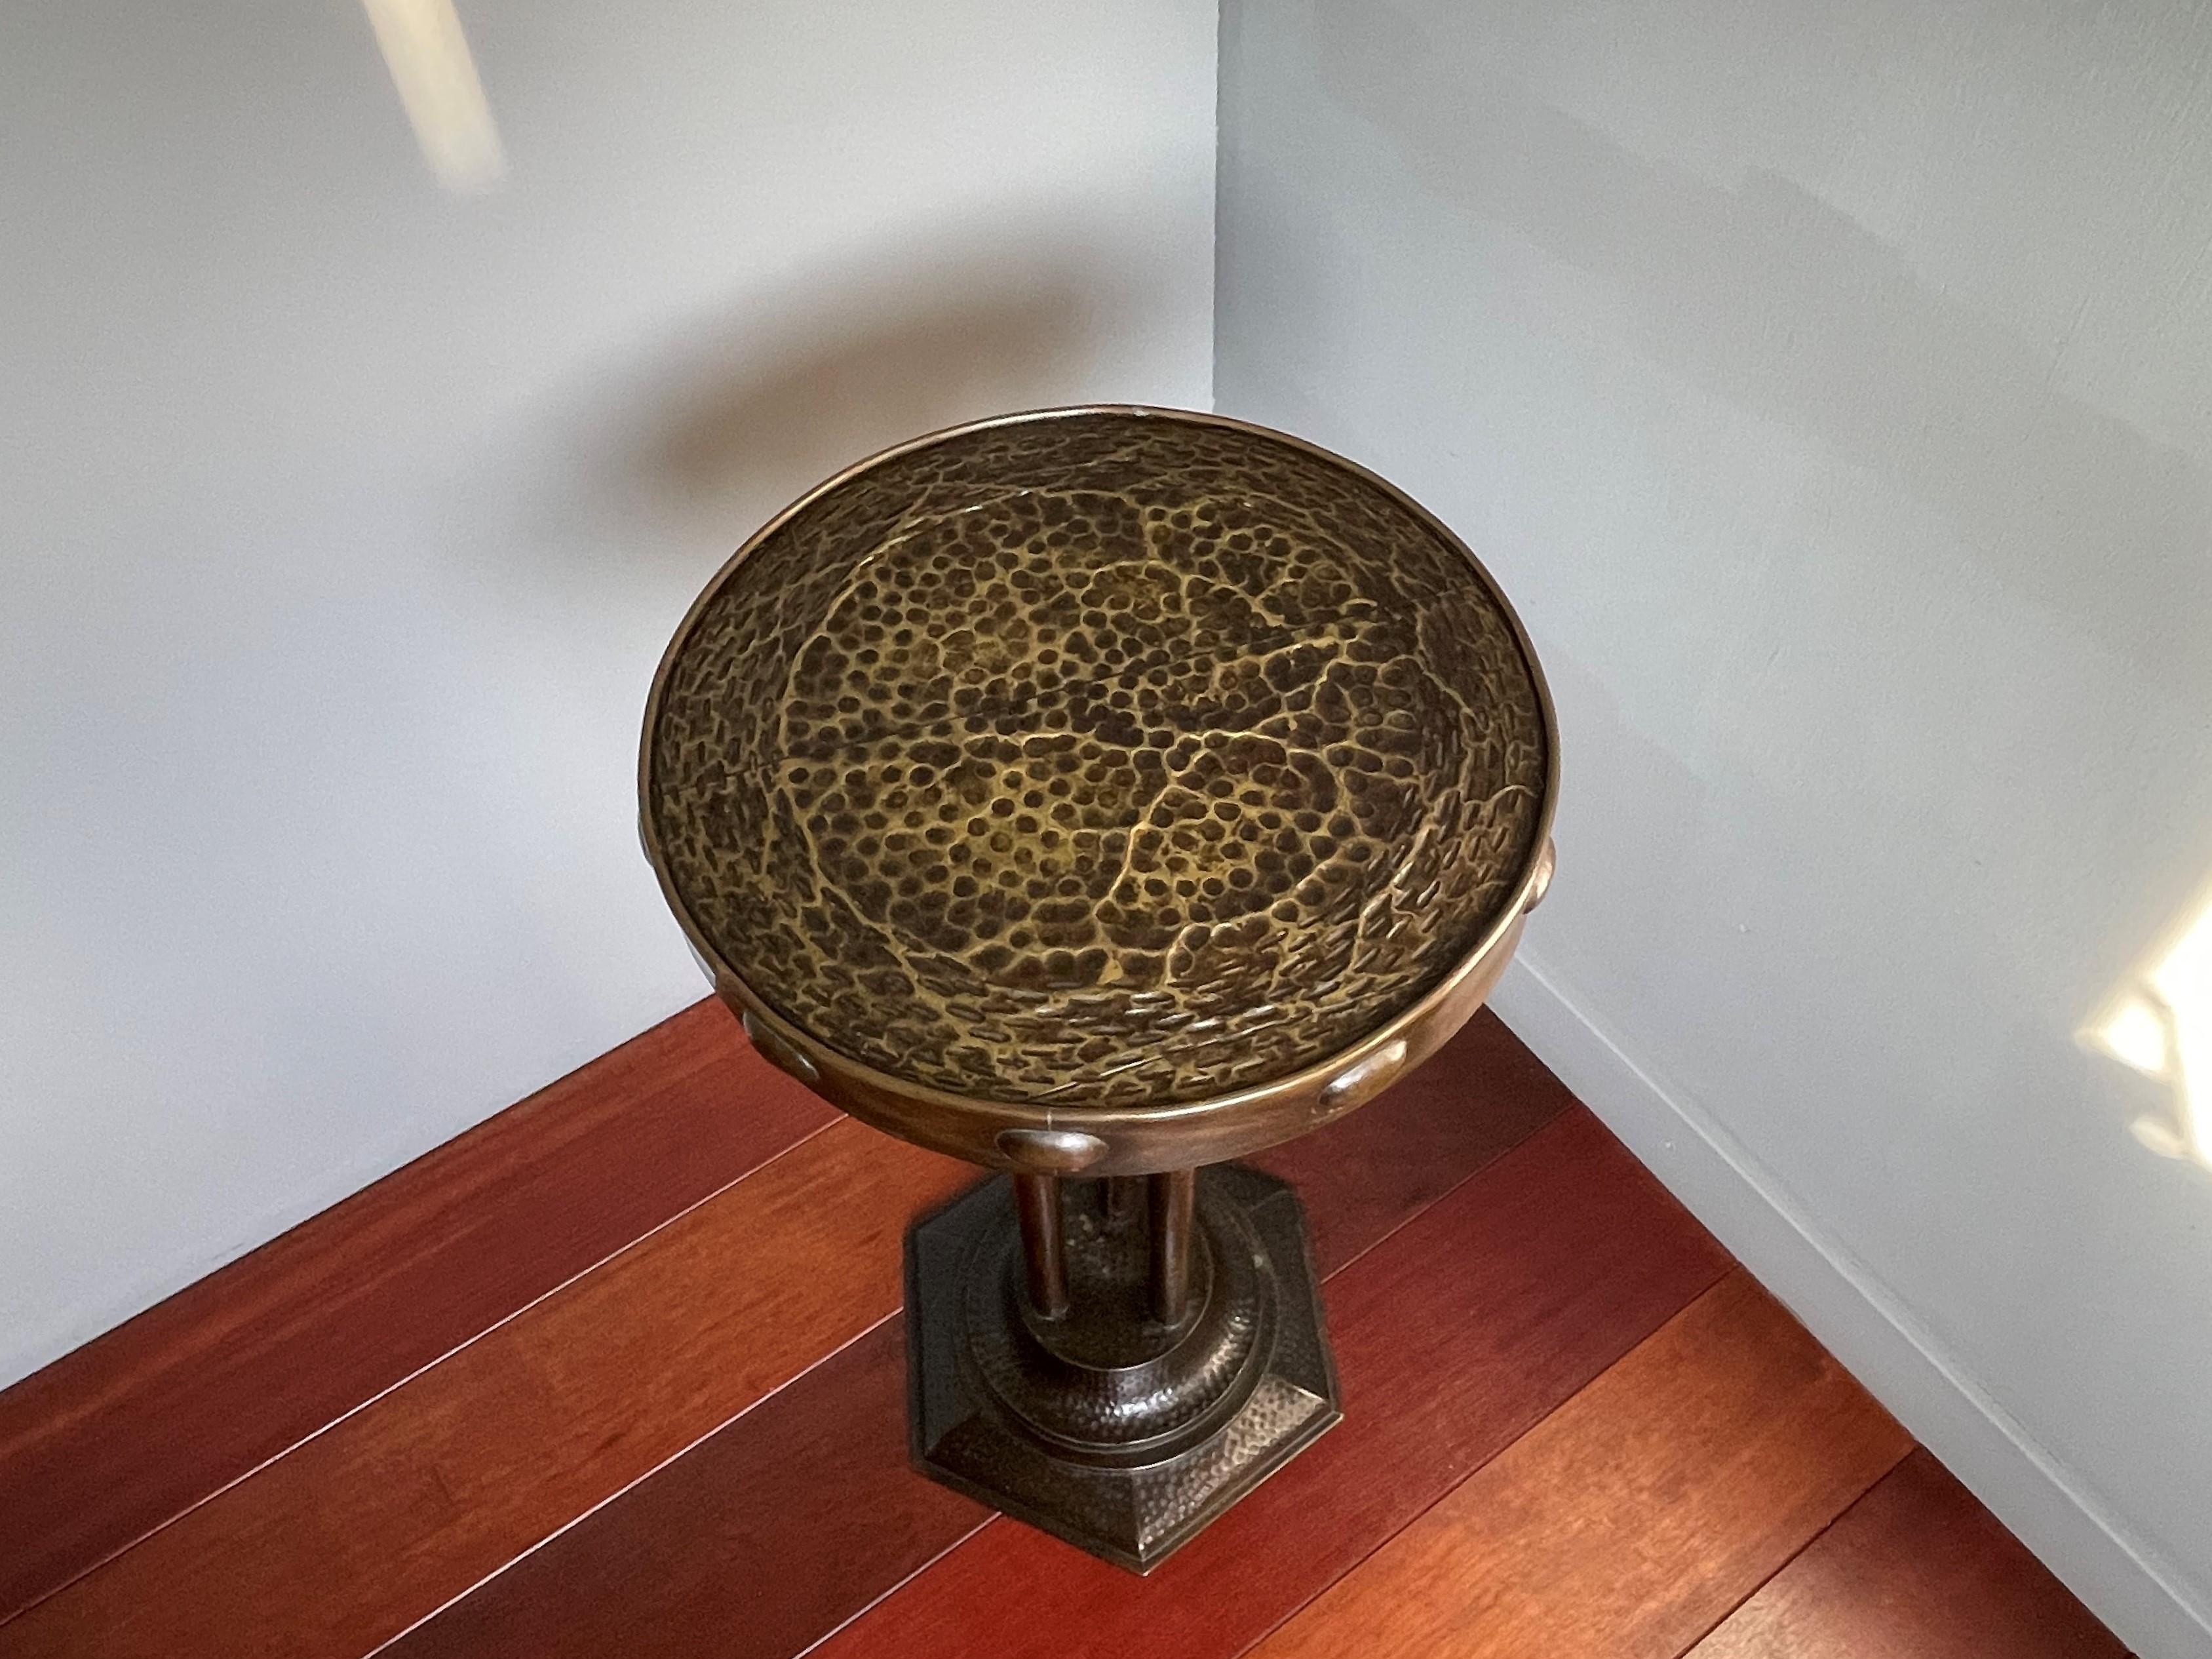 Wonderful early 20th century craftsmanship end table.

Finding the most beautiful and rarest antiques in the best possible condition is what we dream of and we have been very fortunate to have had many dreams come true. When you look at this Arts &